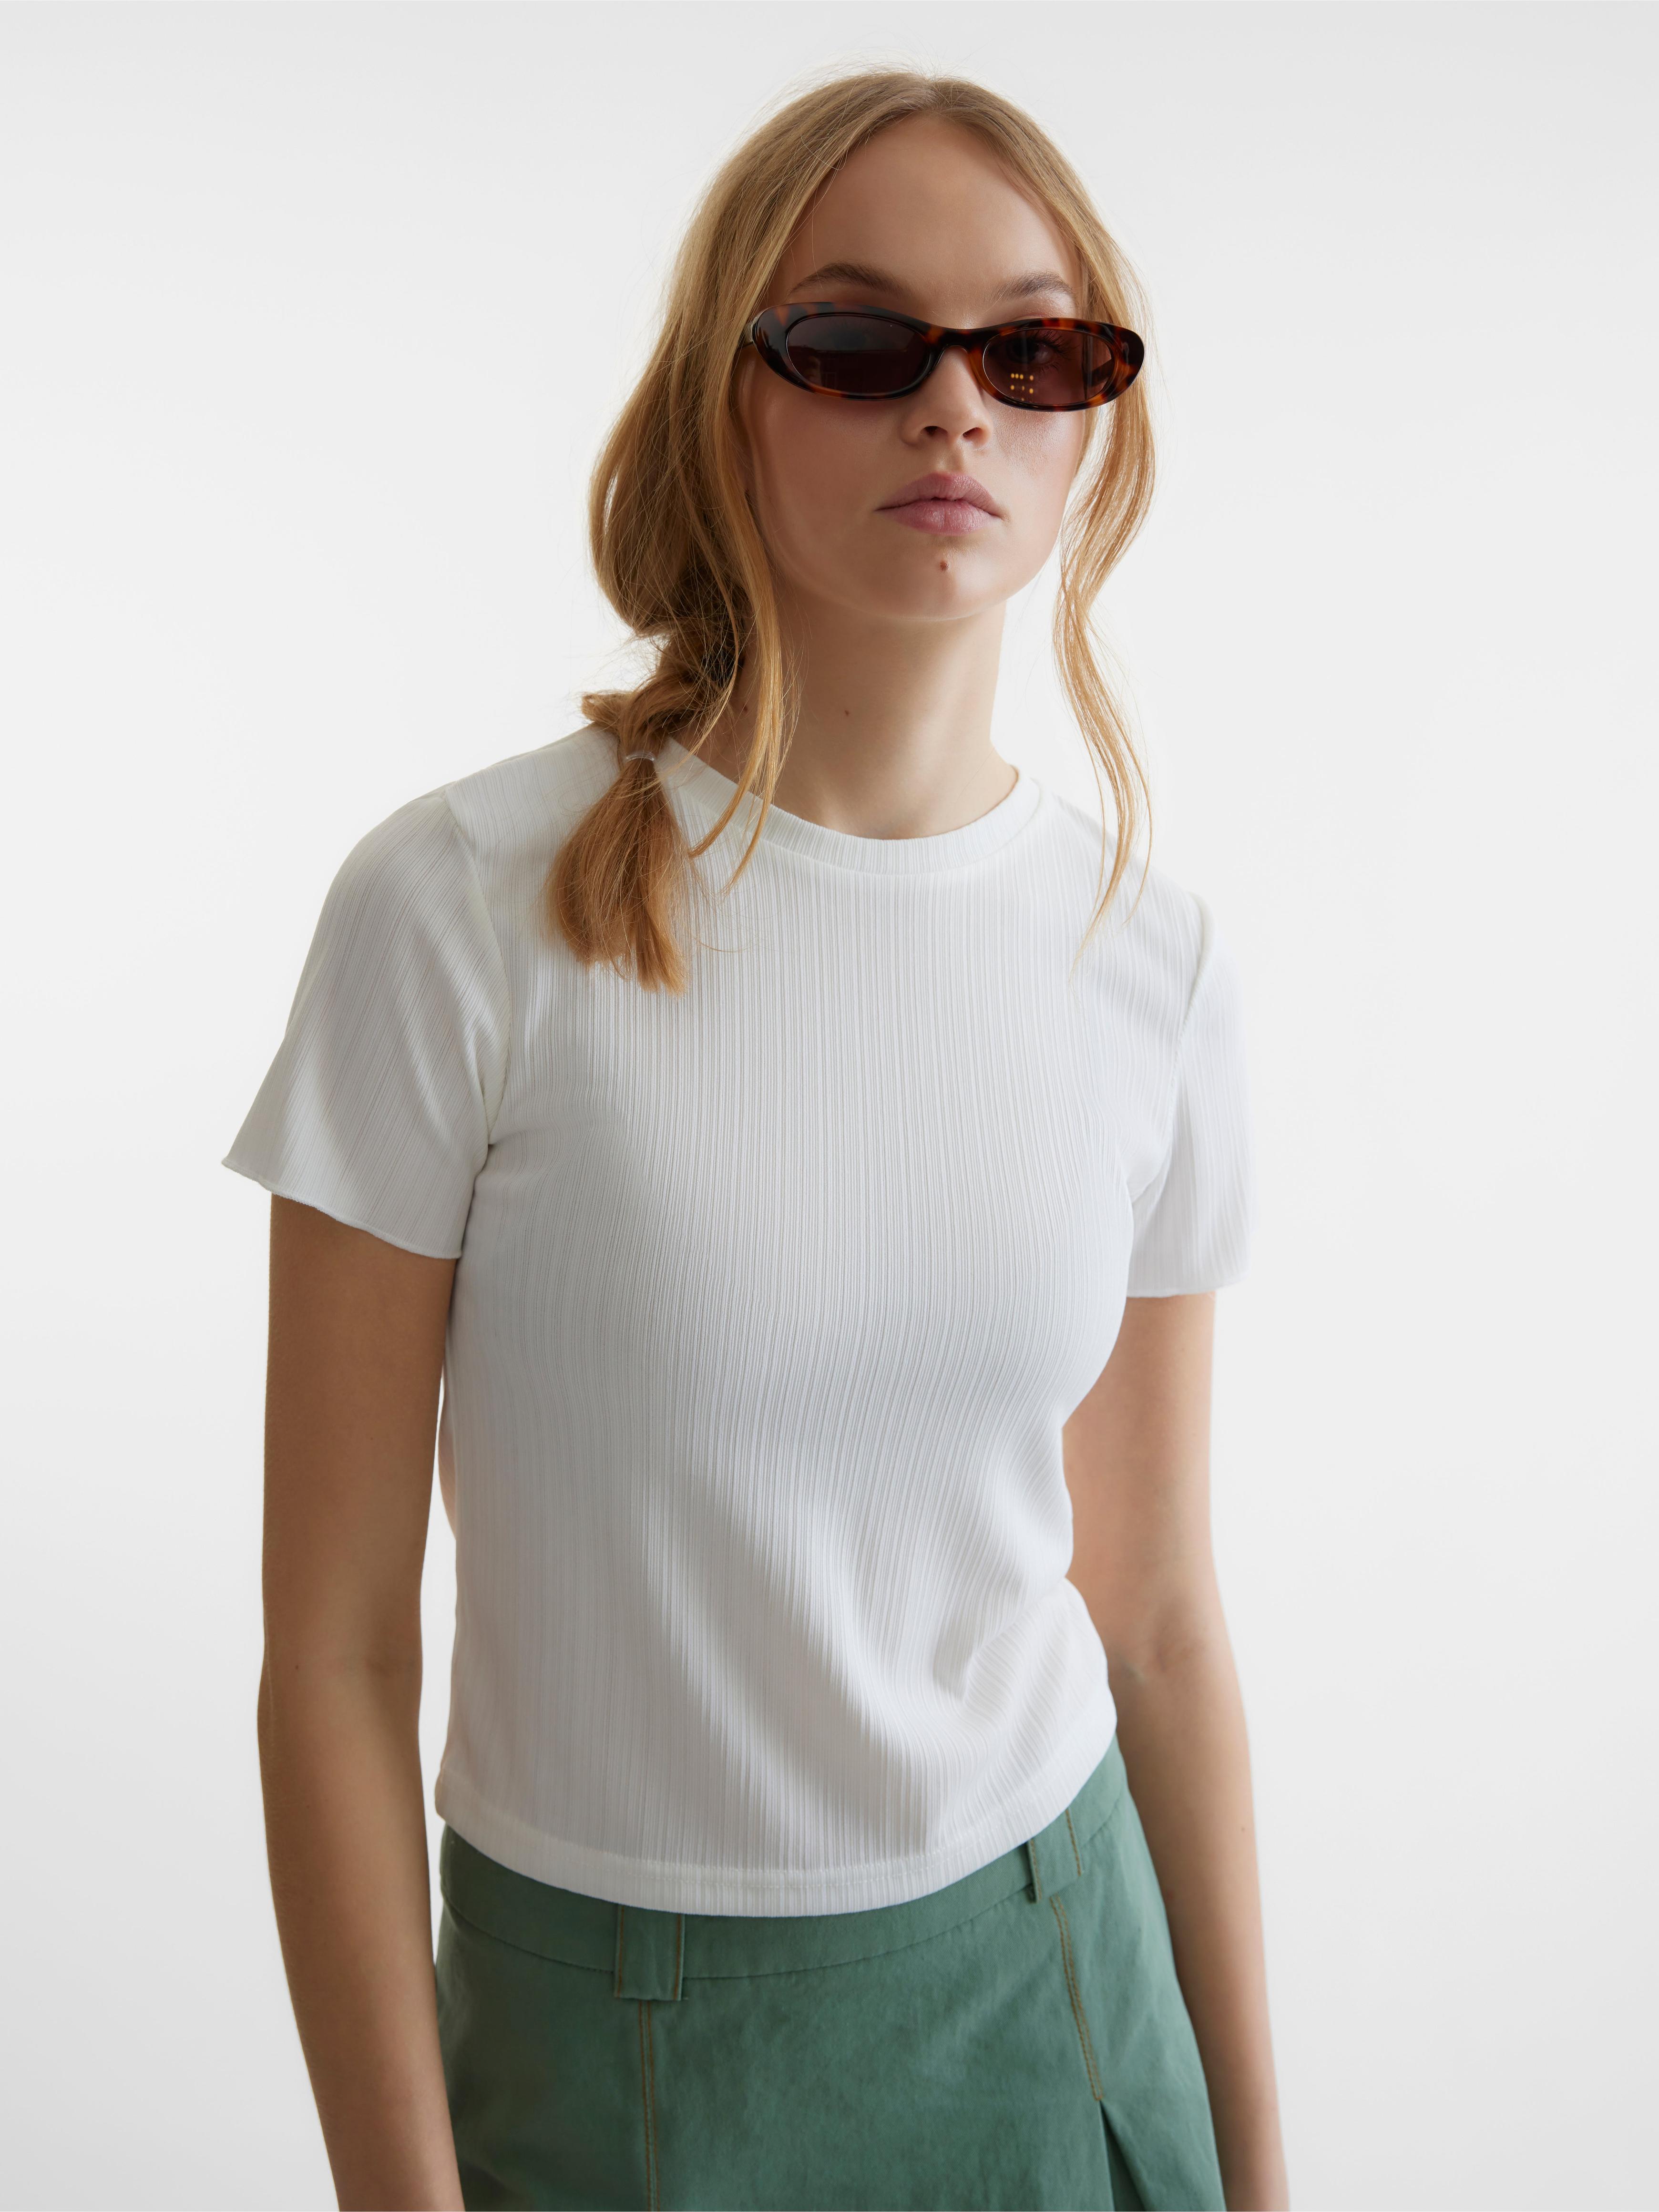 SOMETHING NEW PROJECT; CHLOE FRATER  T-Shirt für 22,43 CHF in Vero Moda